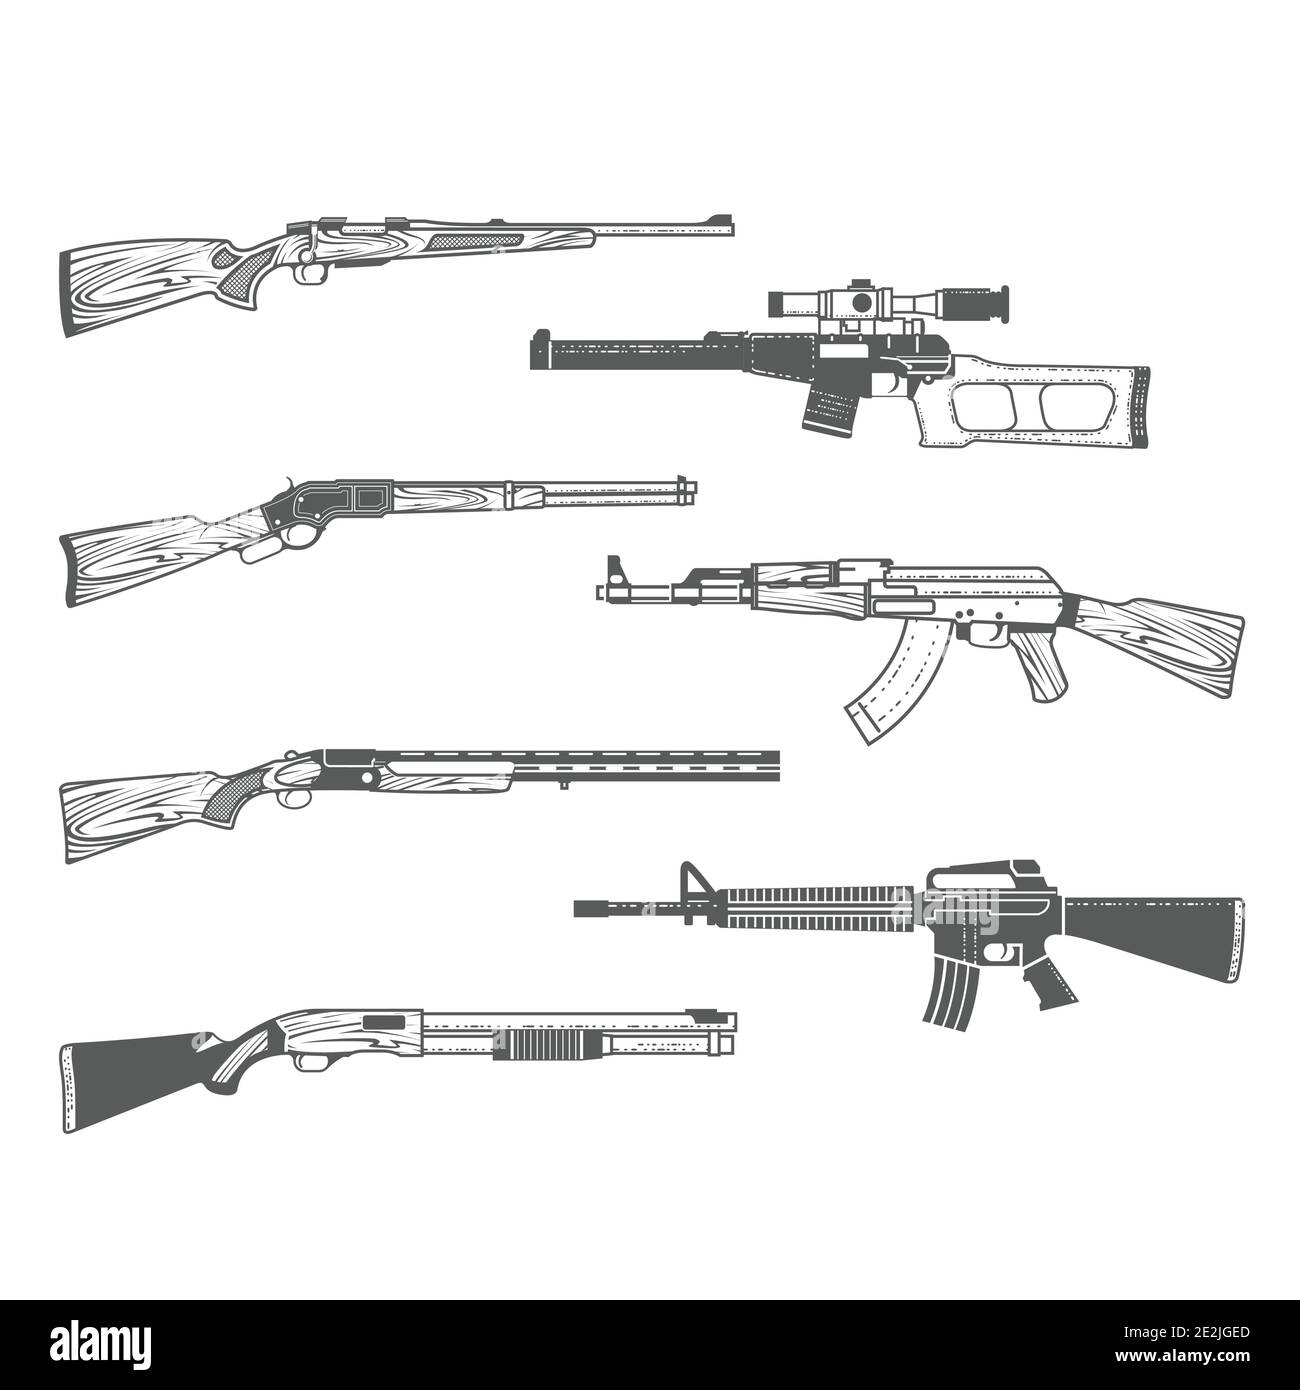 Set of firearms, shotgun, m16 rifle and hunt handgun, guns and weapons in graphic style, vector Stock Vector